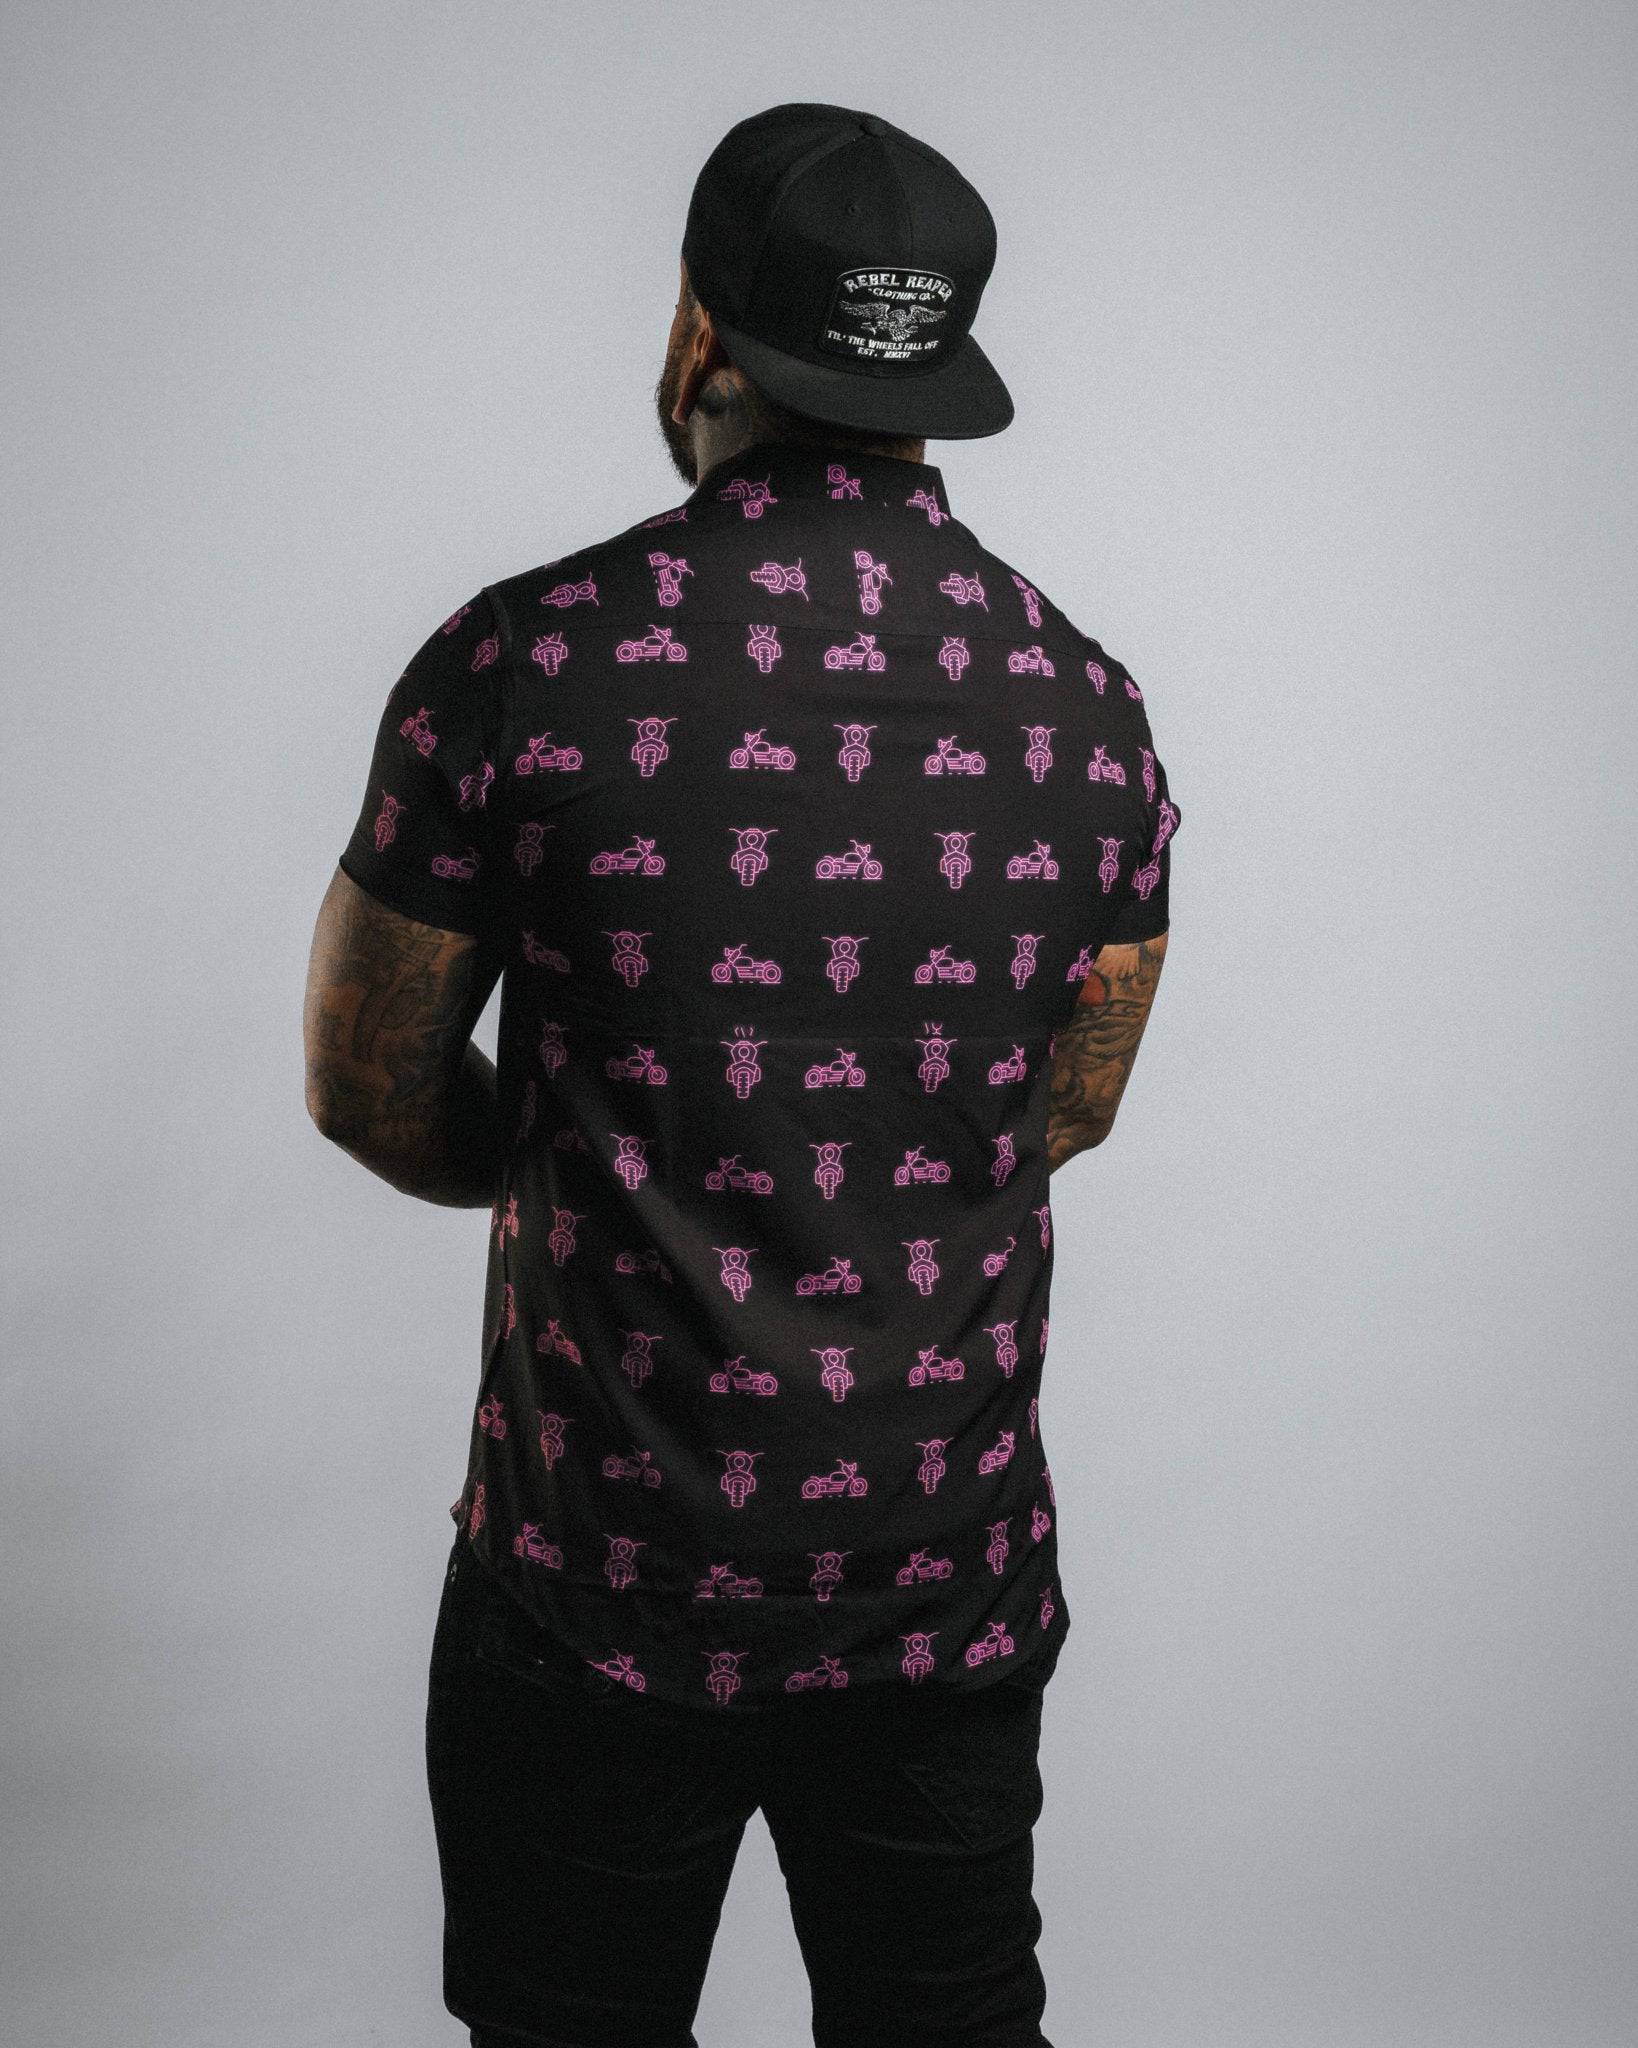 "Neon Motos" (Pink) - Button Up - Rebel Reaper Clothing Company